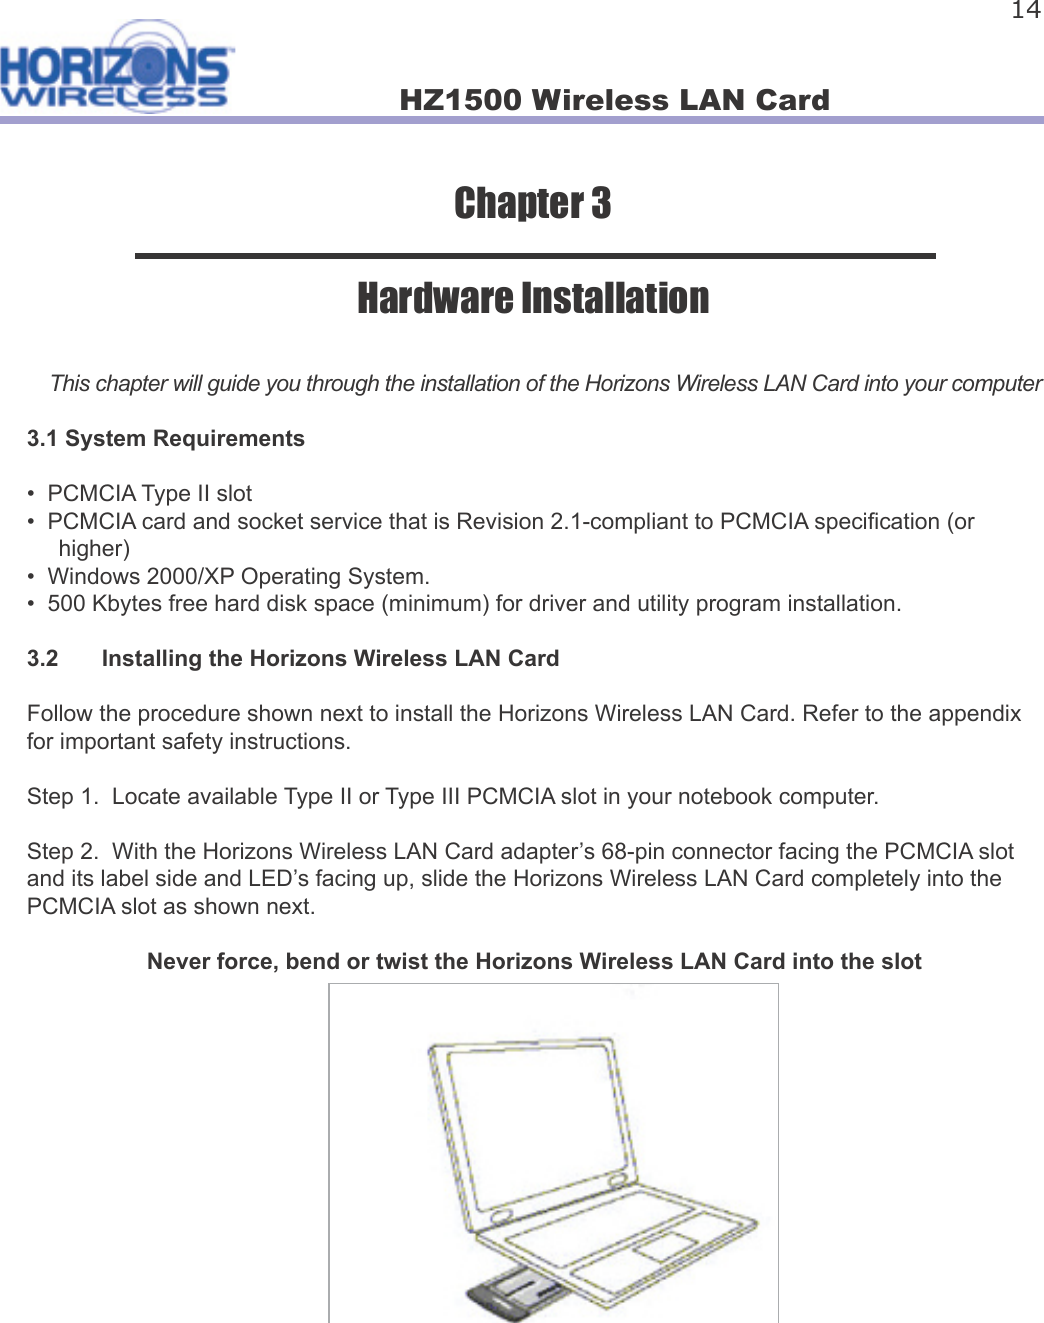 HZ1500 Wireless LAN Card 14Chapter 3Hardware InstallationThis chapter will guide you through the installation of the Horizons Wireless LAN Card into your computer3.1 System Requirements•  PCMCIA Type II slot•  PCMCIA card and socket service that is Revision 2.1-compliant to PCMCIA speci cation (or      higher)•  Windows 2000/XP Operating System.•  500 Kbytes free hard disk space (minimum) for driver and utility program installation.3.2  Installing the Horizons Wireless LAN CardFollow the procedure shown next to install the Horizons Wireless LAN Card. Refer to the appendix for important safety instructions.Step 1.  Locate available Type II or Type III PCMCIA slot in your notebook computer.Step 2.  With the Horizons Wireless LAN Card adapter’s 68-pin connector facing the PCMCIA slot and its label side and LED’s facing up, slide the Horizons Wireless LAN Card completely into the PCMCIA slot as shown next.  Never force, bend or twist the Horizons Wireless LAN Card into the slot 